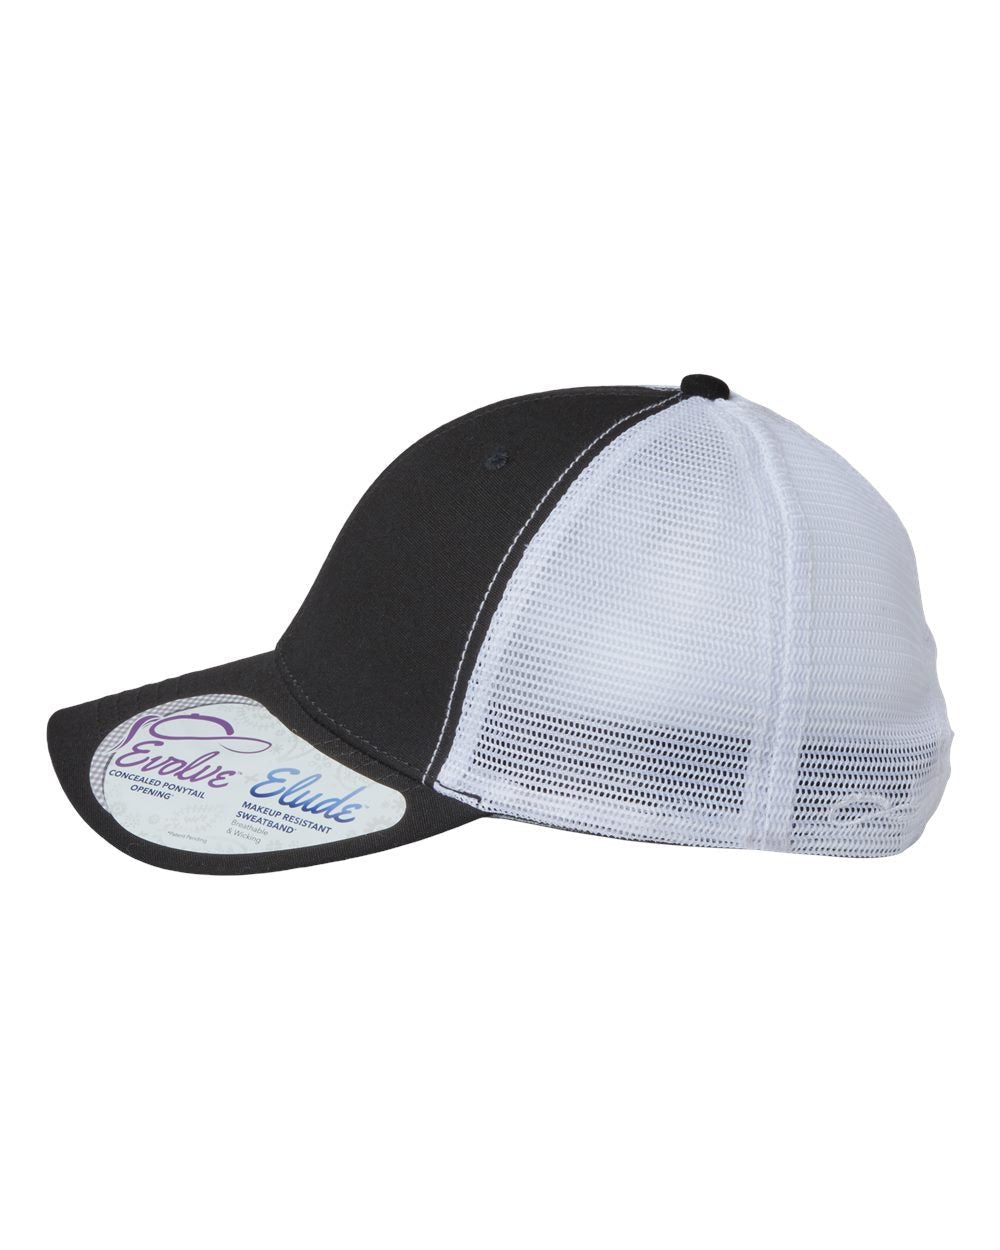 Women's Low Pressure Club Ponytail Hat - Goats Trail Off-Road Apparel Company